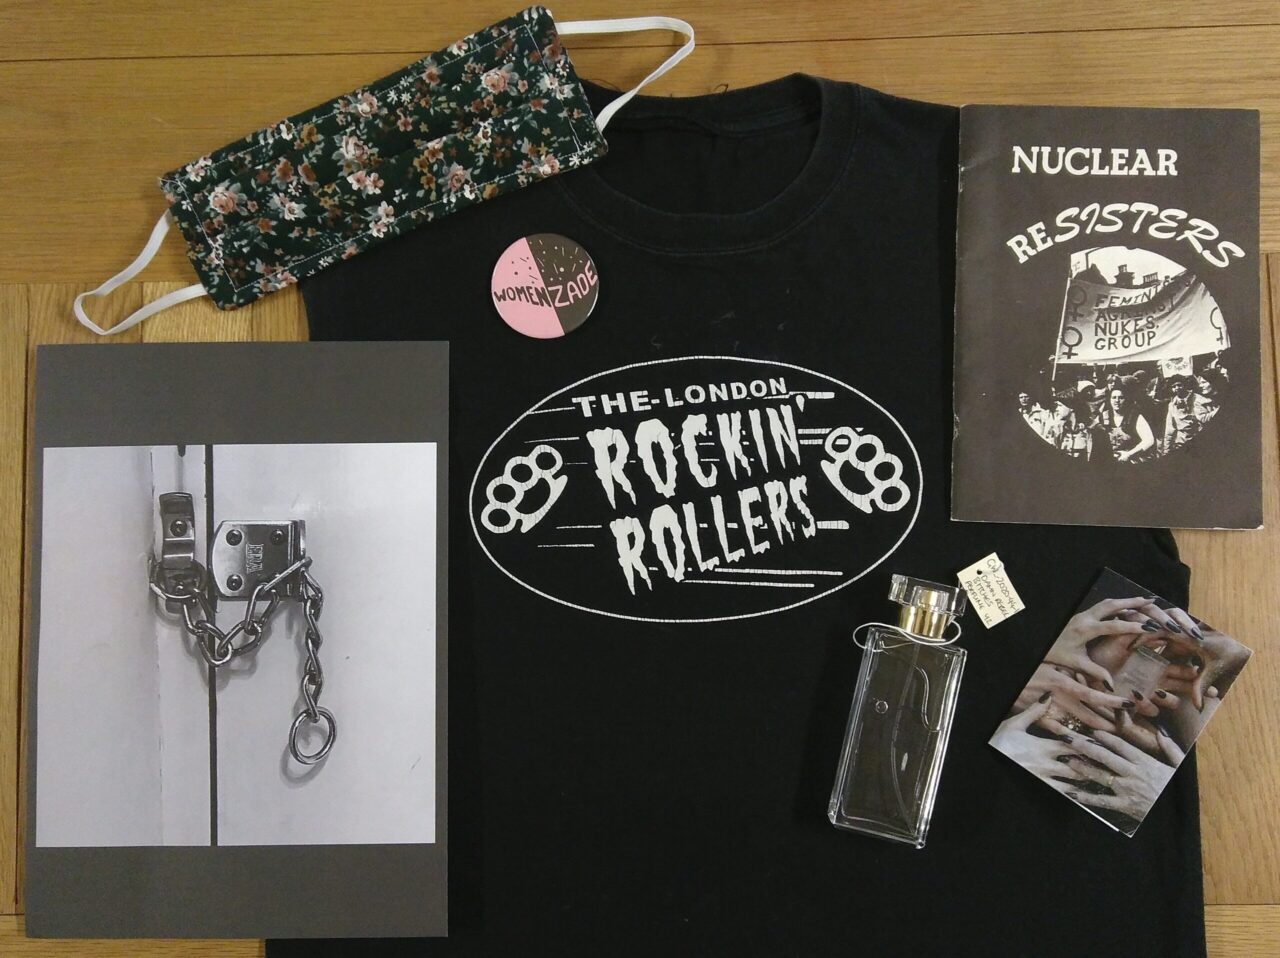 A selection of the materials gifted to GWL during the COVID-19 lockdown including a face mask and a black Rockin Rollers t-shirt.